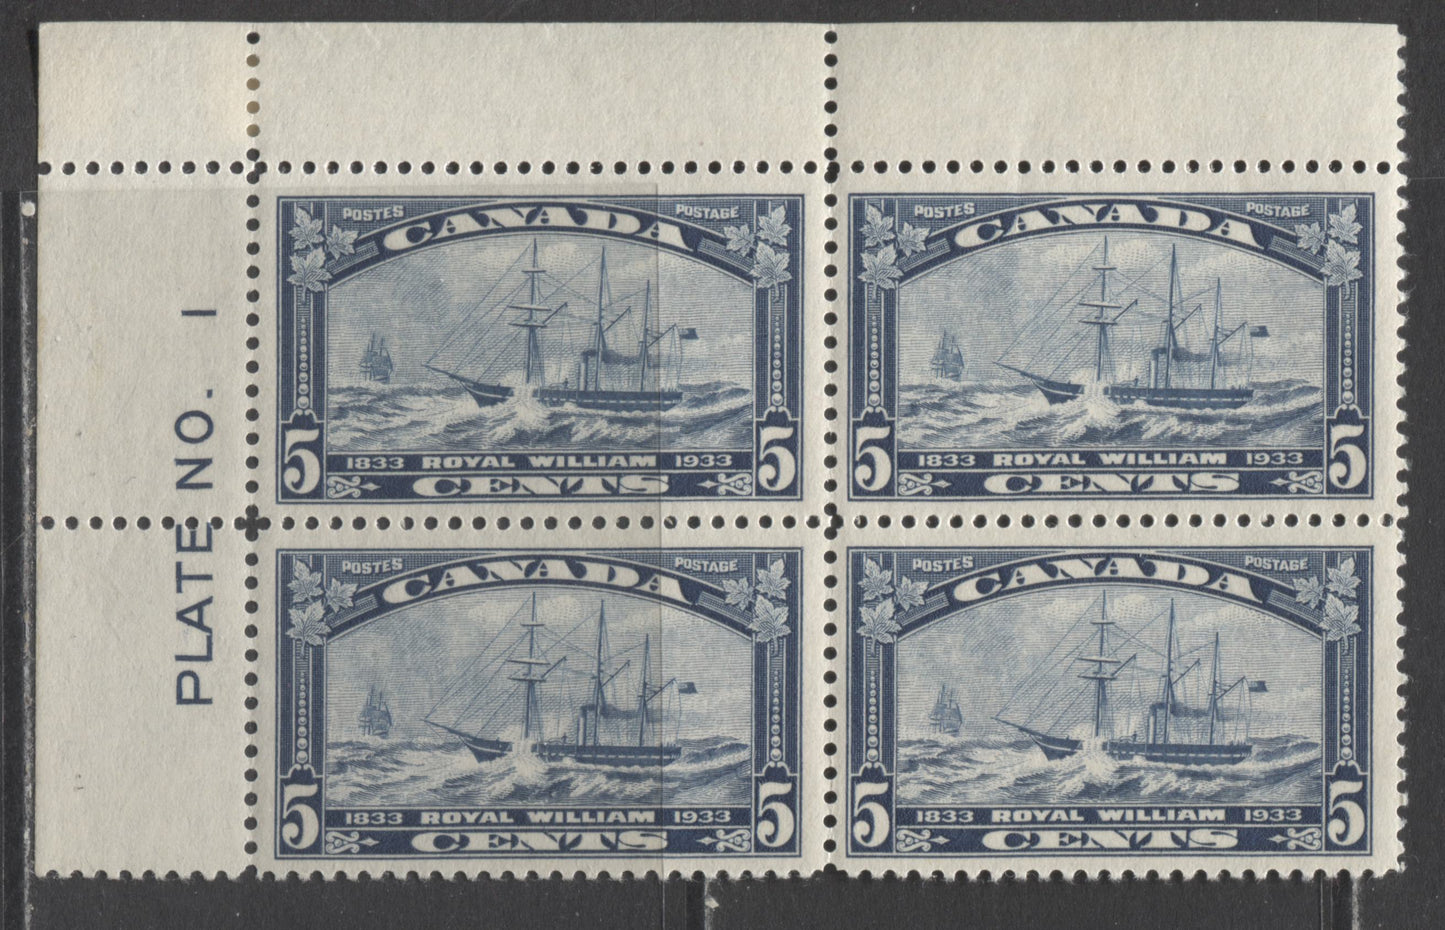 Lot 267 Canada #204 5c Dark Blue Royal William, 1933 Royal William Issue, A FNH UL Plate 1 Block Of 4, Minor Offset On Gum